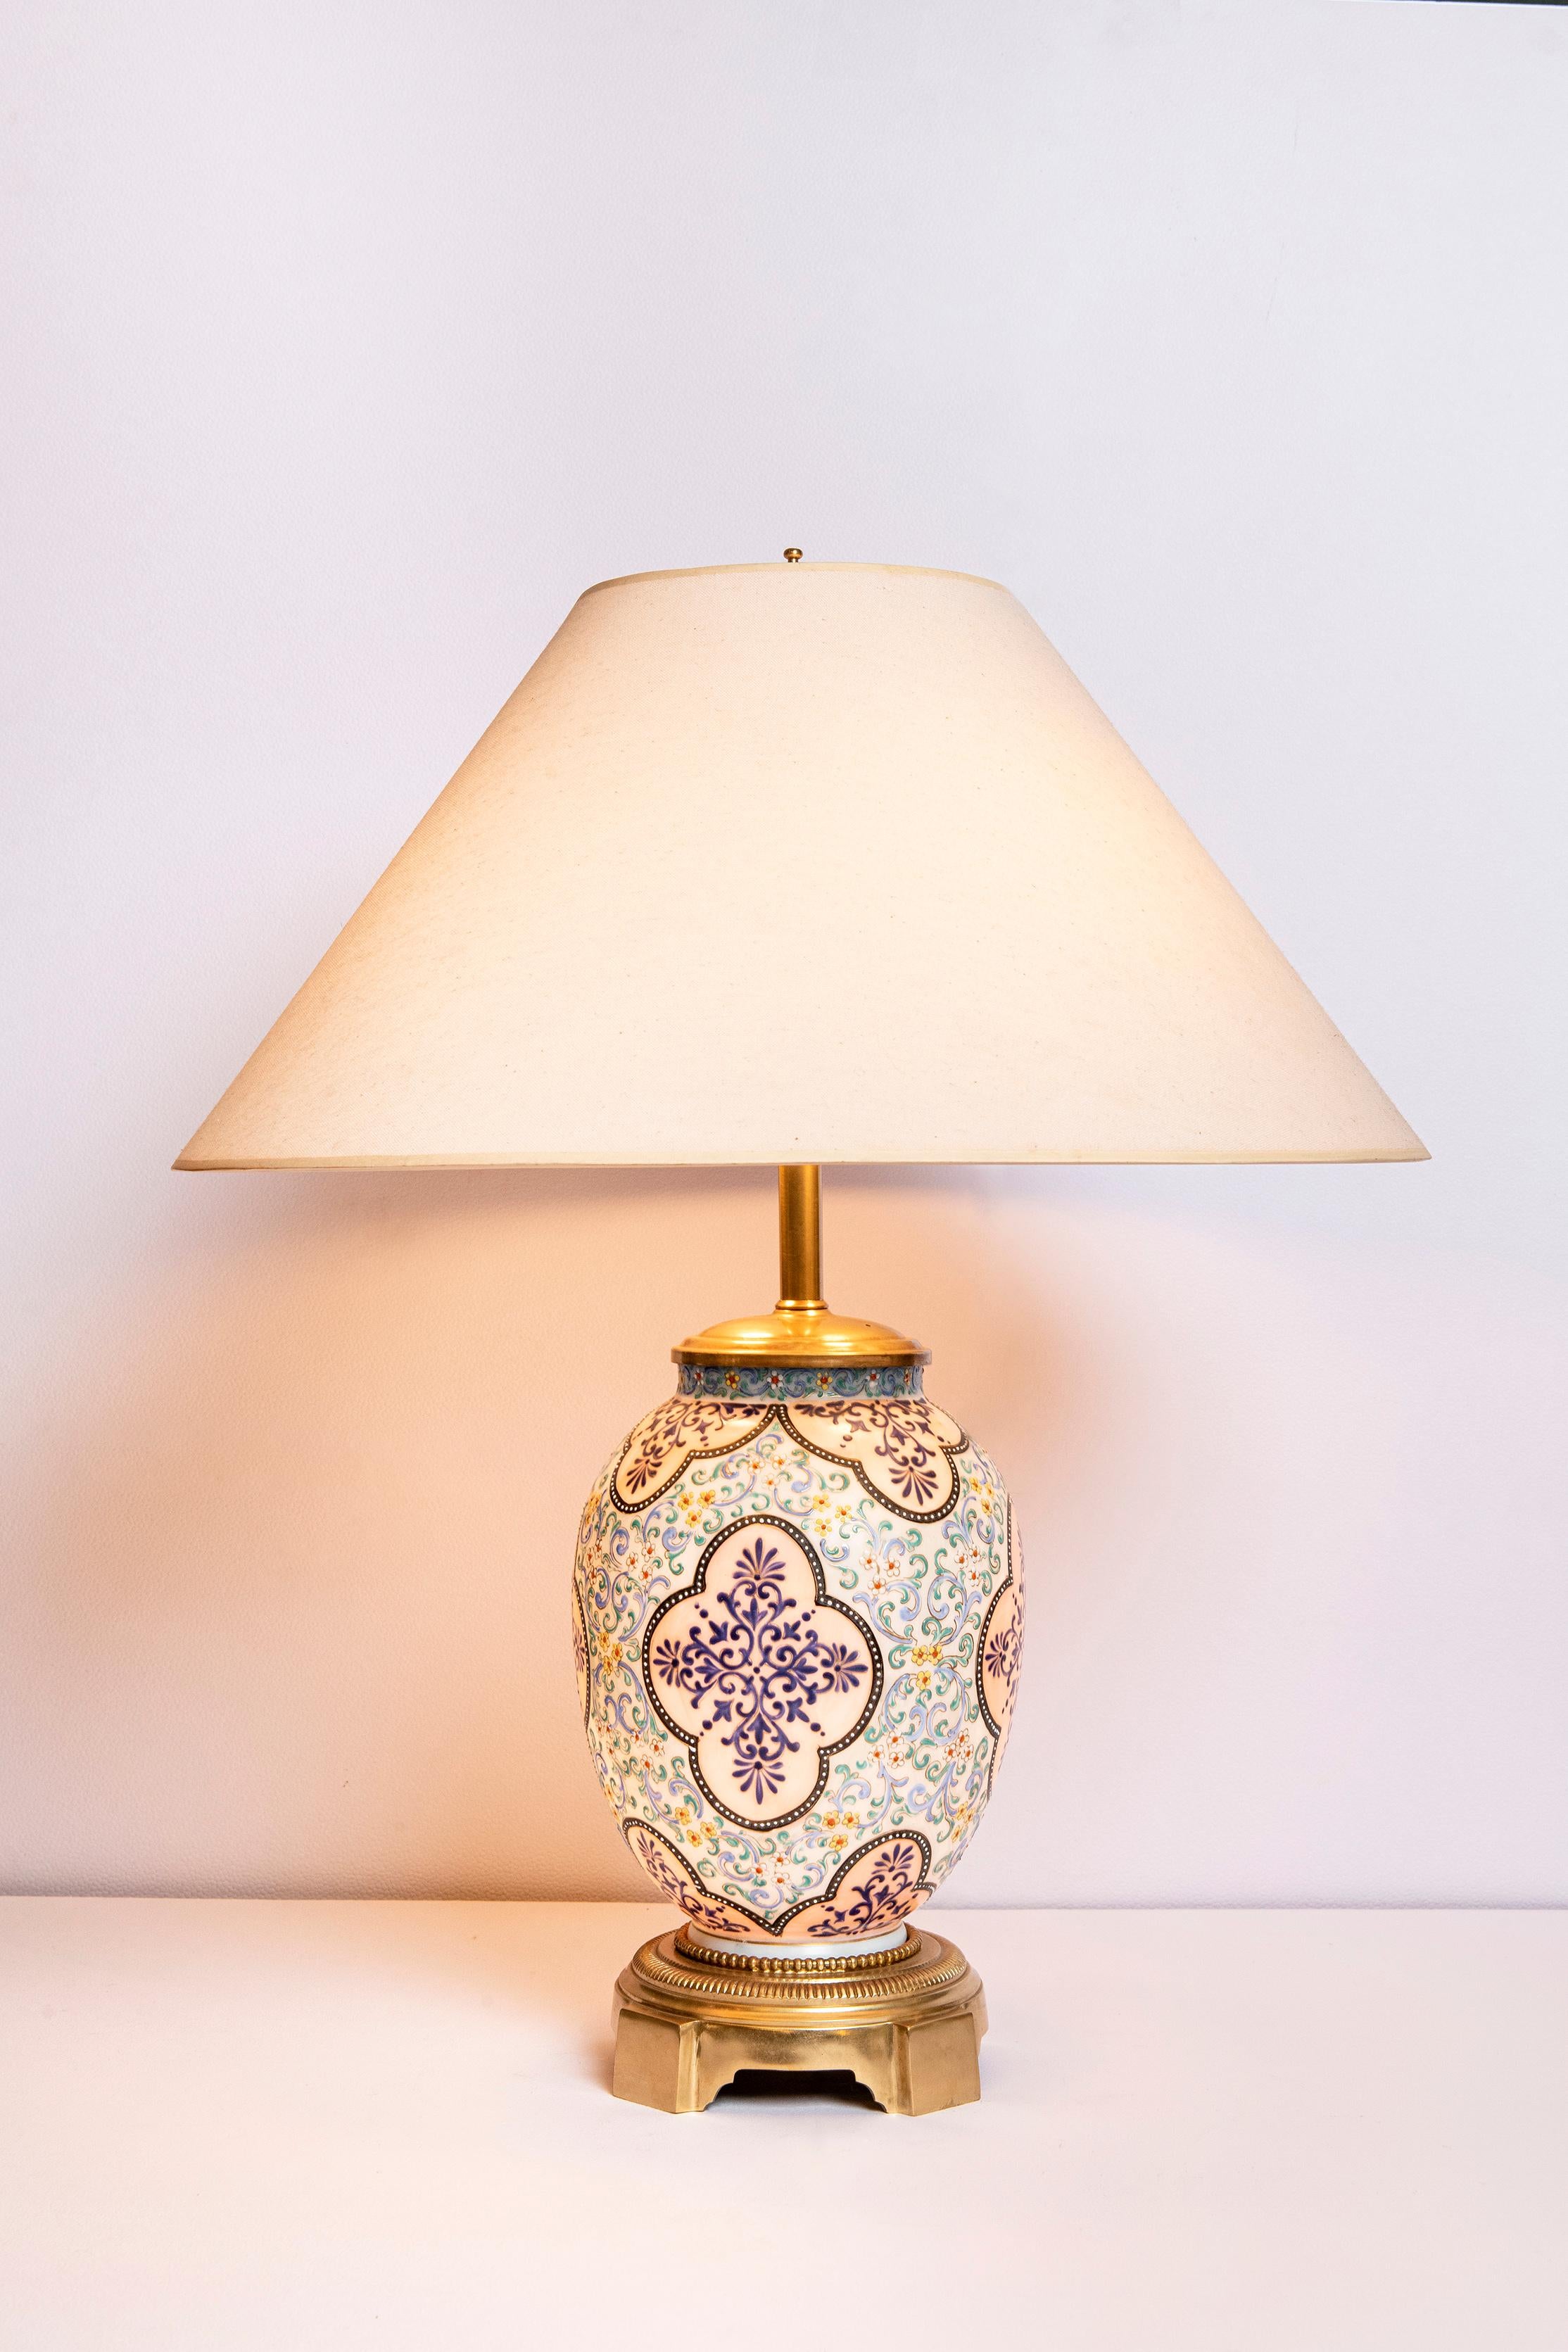 Pair of painted opaline and bronze table lamps, Czech, late 19th century.

Size: Height with shade 60 cm.